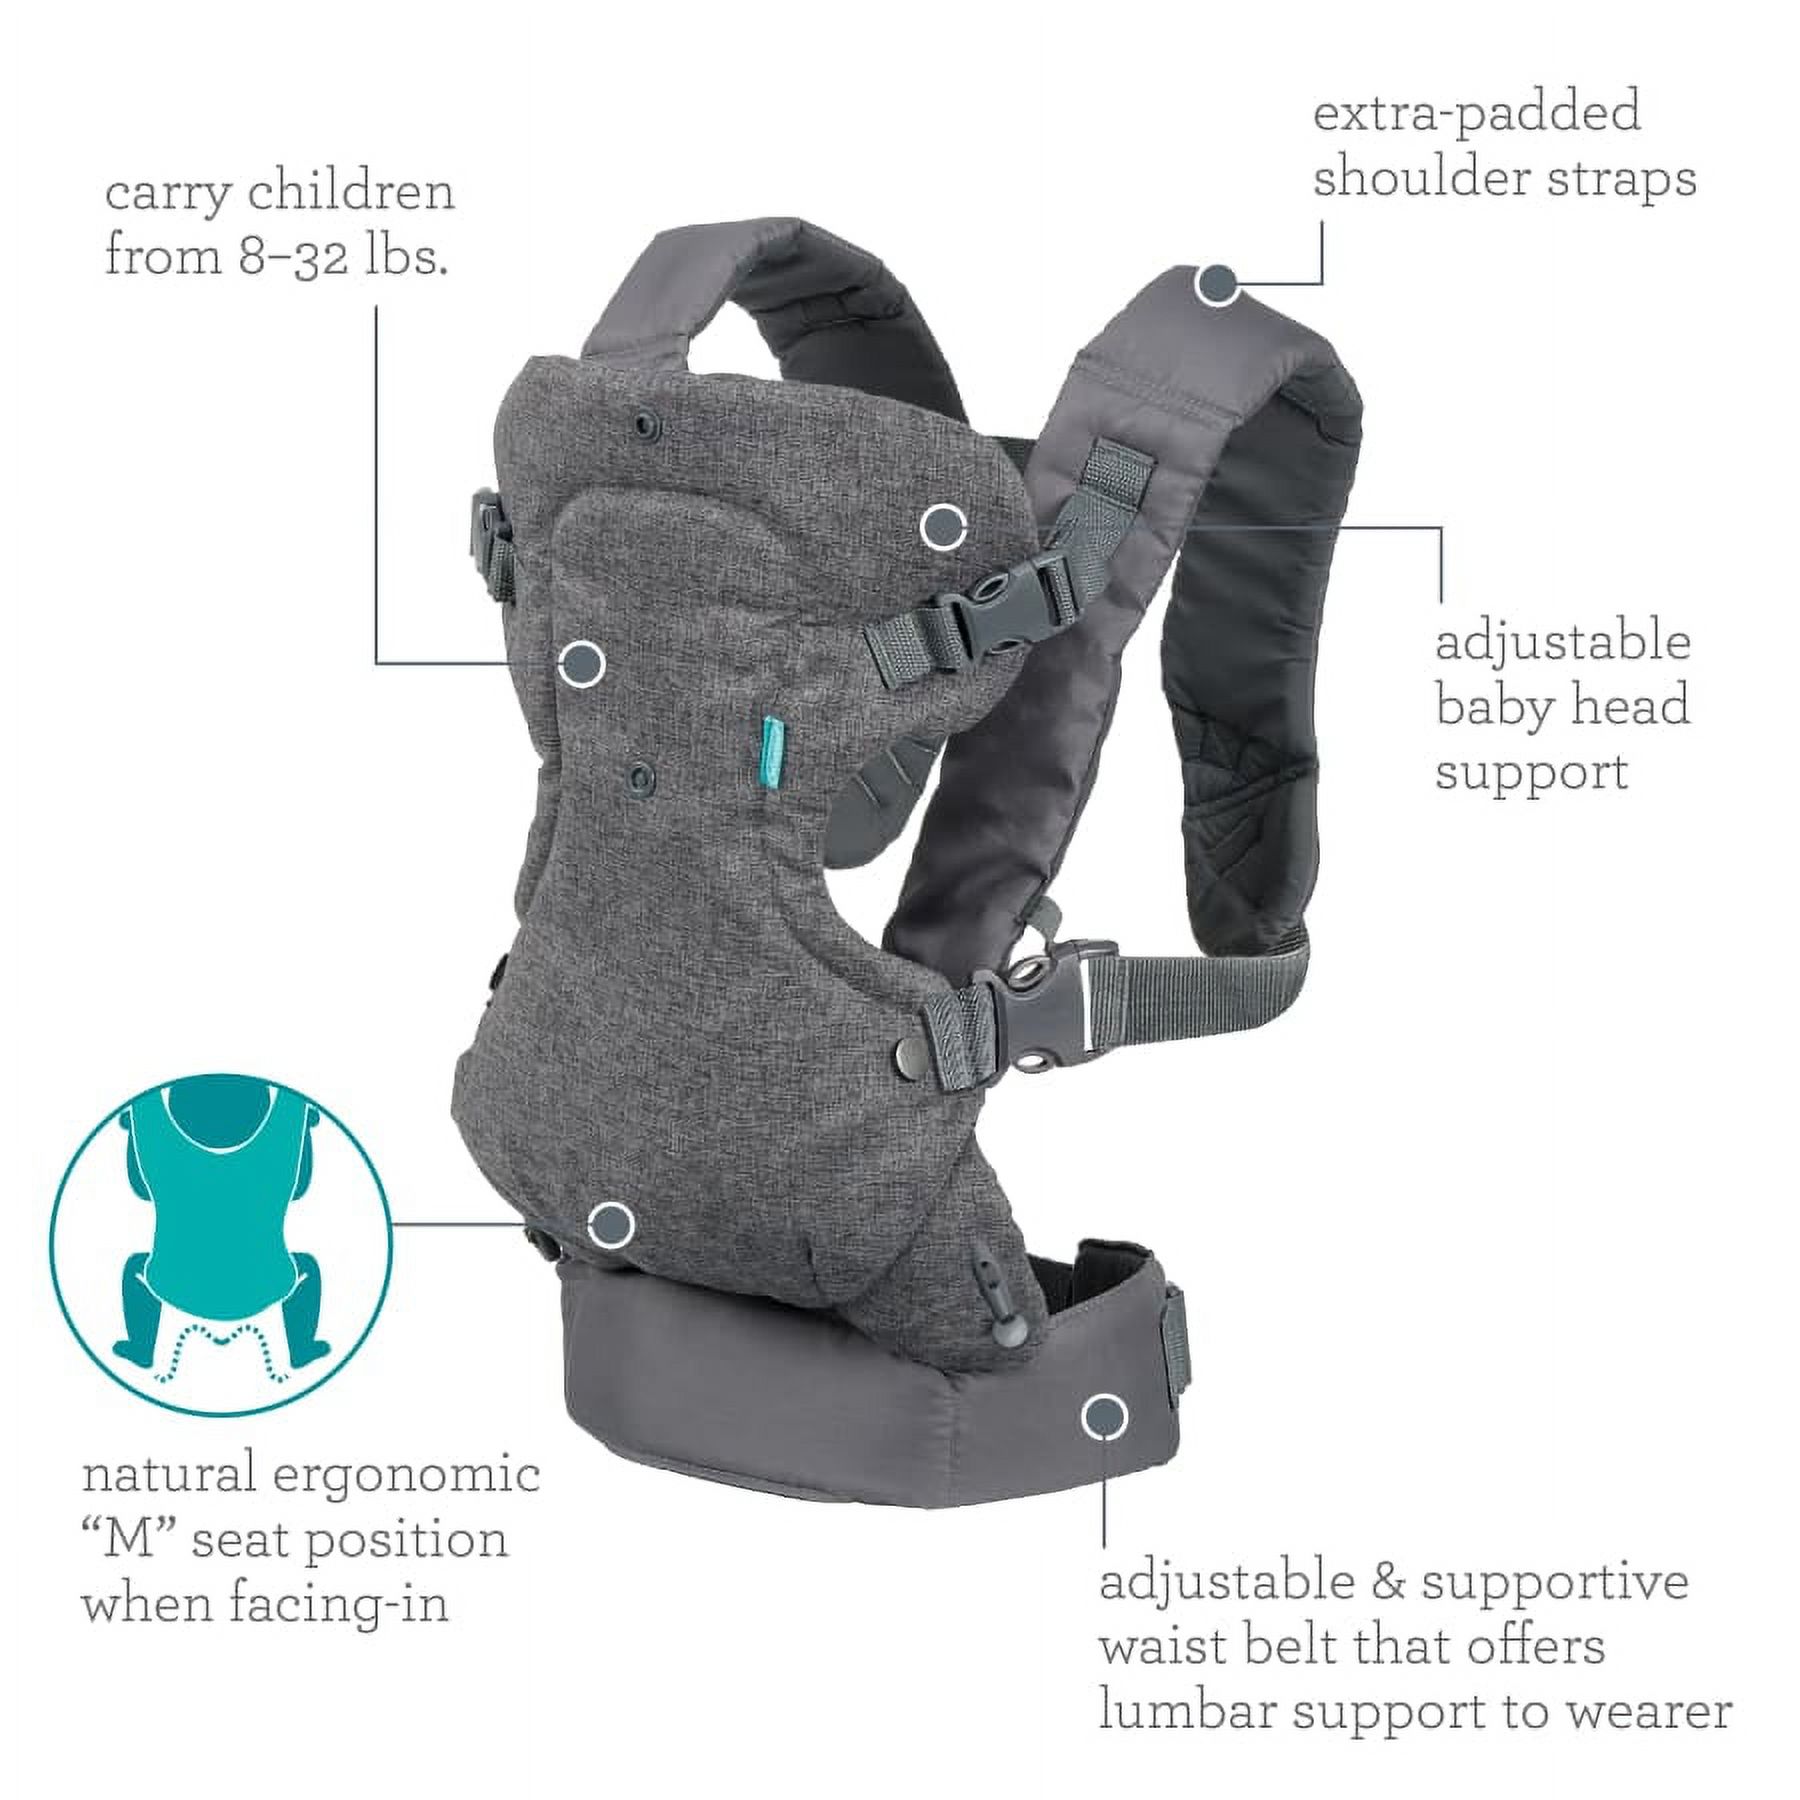 Infantino Flip 4-in-1 Convertible Baby Carrier, 4-Position, Unisex, 8-32lb, Gray - image 4 of 9